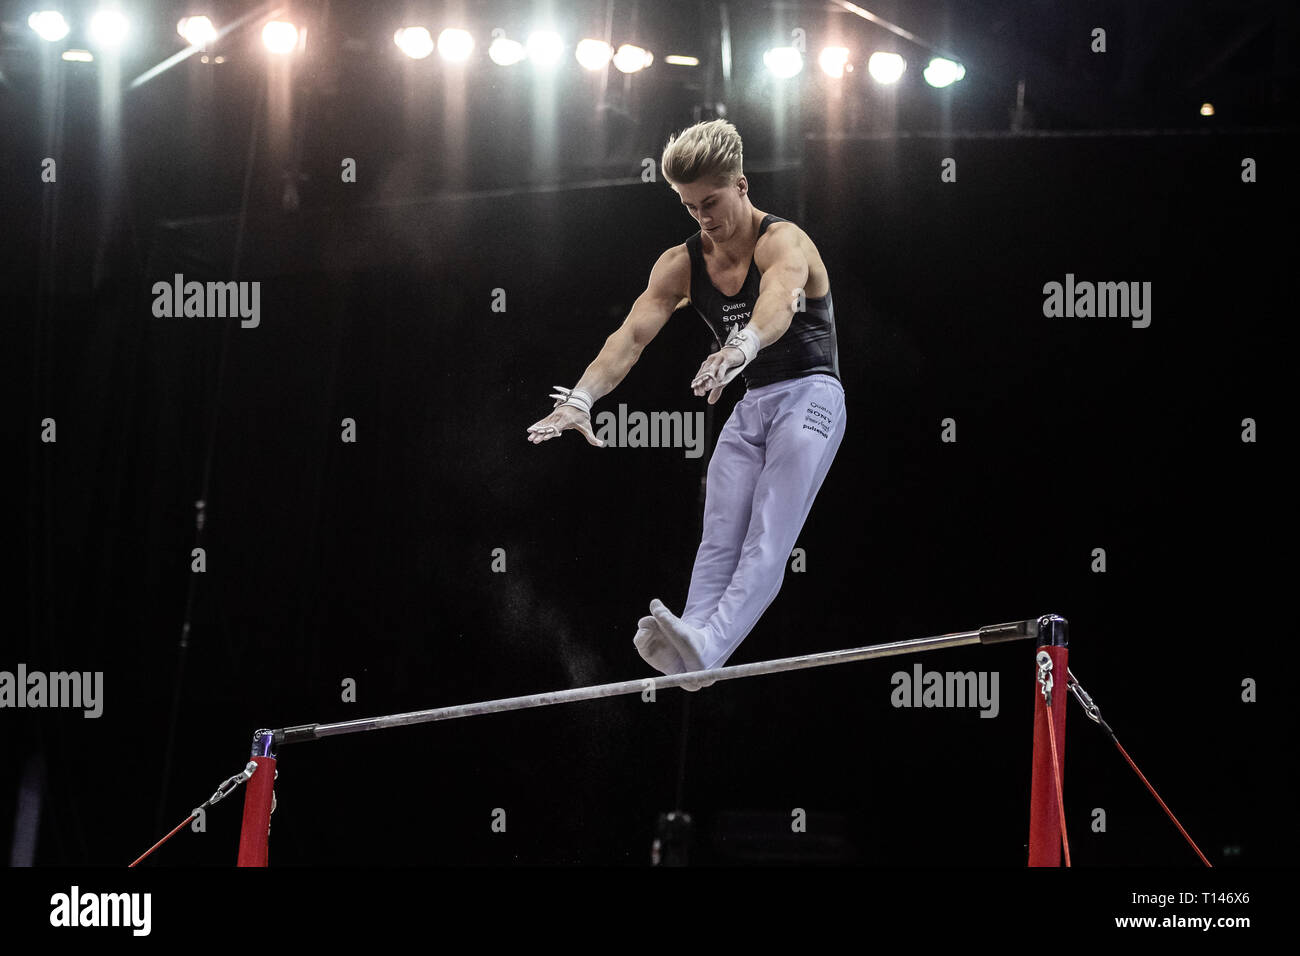 London, UK. 23rd March, 2019. Jay Thompson during the Matchroom Multisport presents the 2019 Superstars of Gymnastics at The O2 Arena on Saturday, 23 March 2019. LONDON ENGLAND. Credit: Taka G Wu/Alamy News Stock Photo